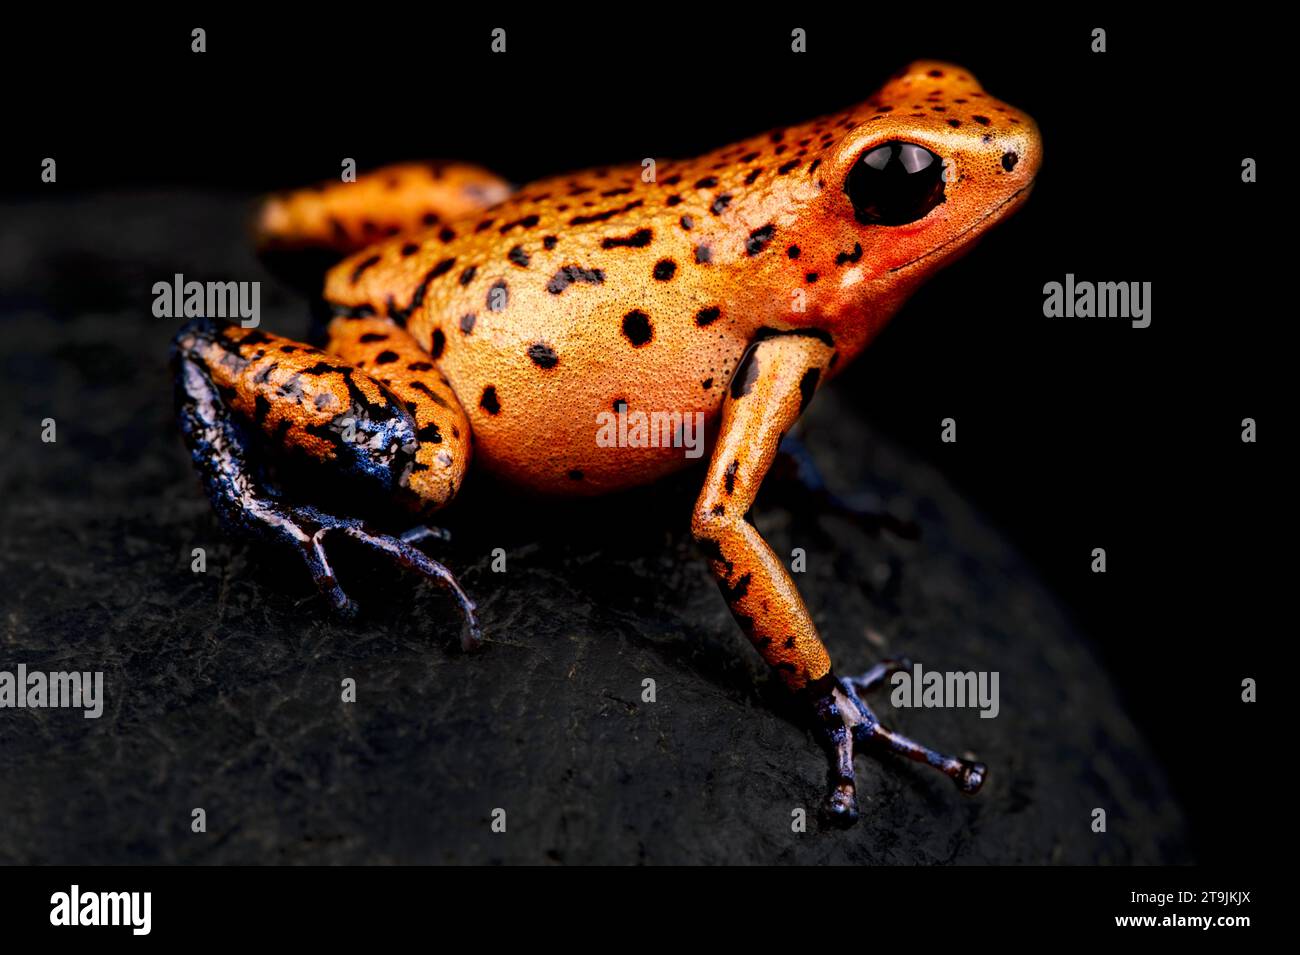 The Strawberry dart frog (Oophaga pumilio) is a highly variable colored amphibian species . This is a Bocas del Torro, Panama specimen. Stock Photo